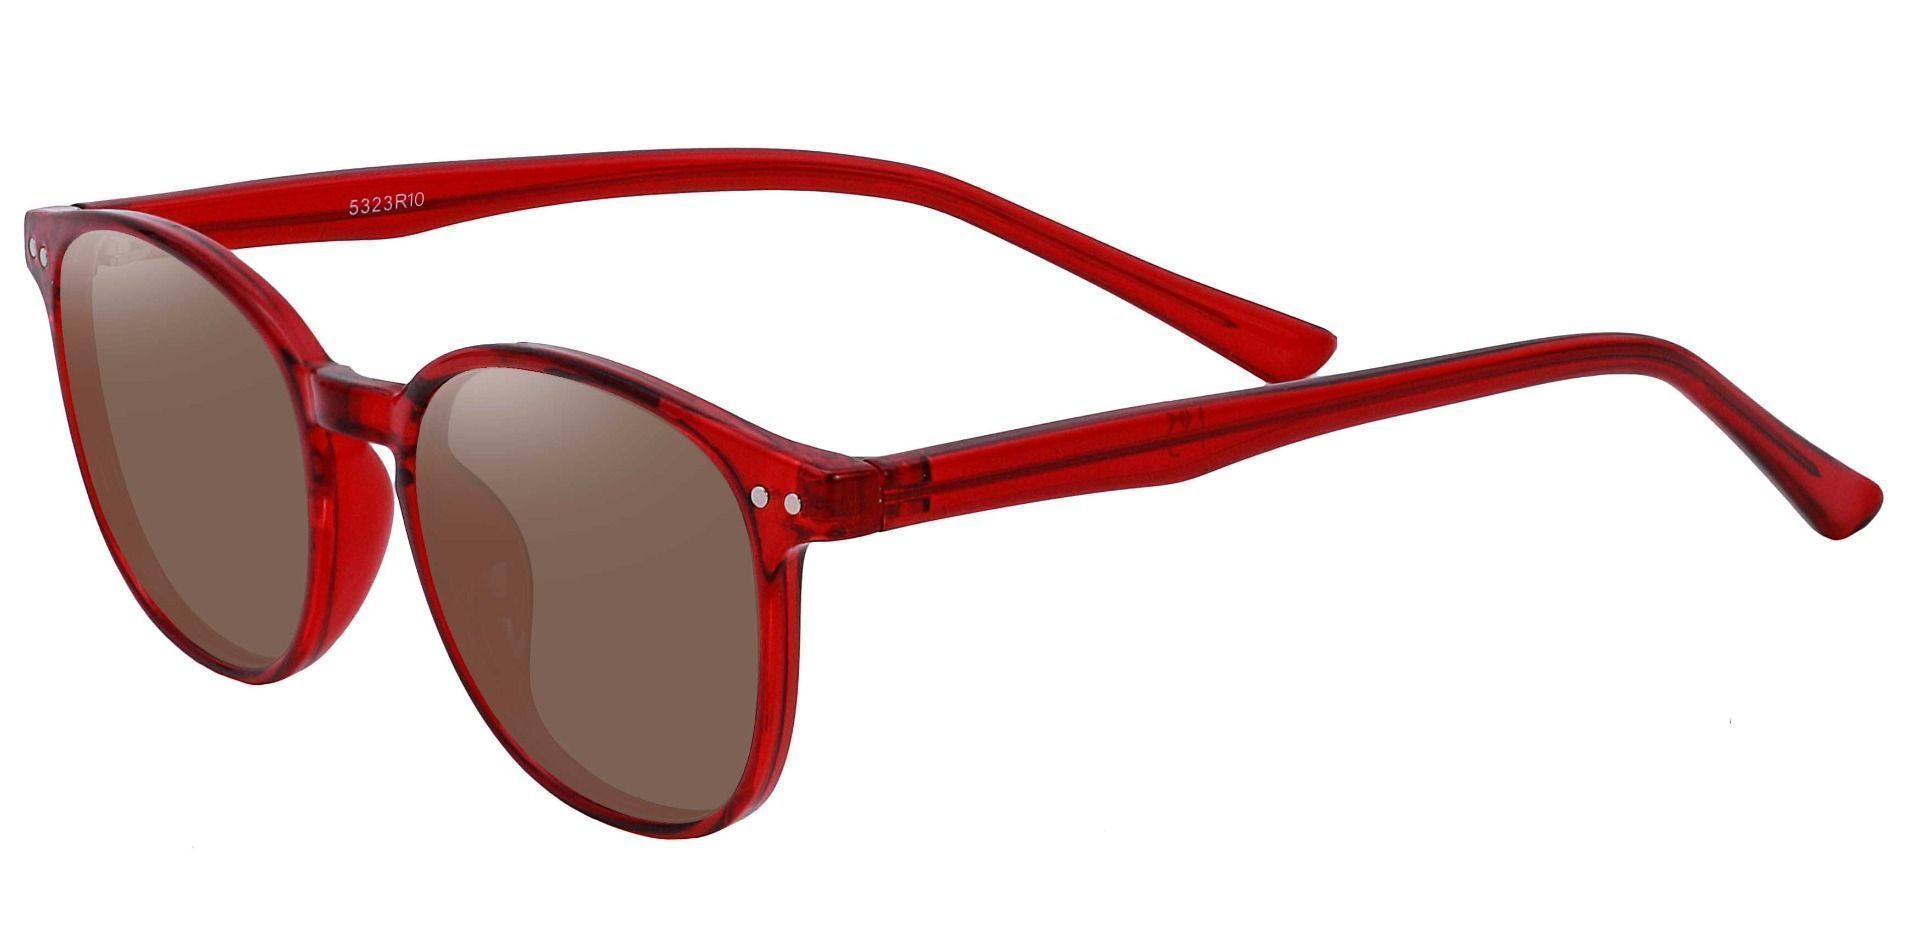 Holstein Oval Prescription Sunglasses - Red Frame With Brown Lenses